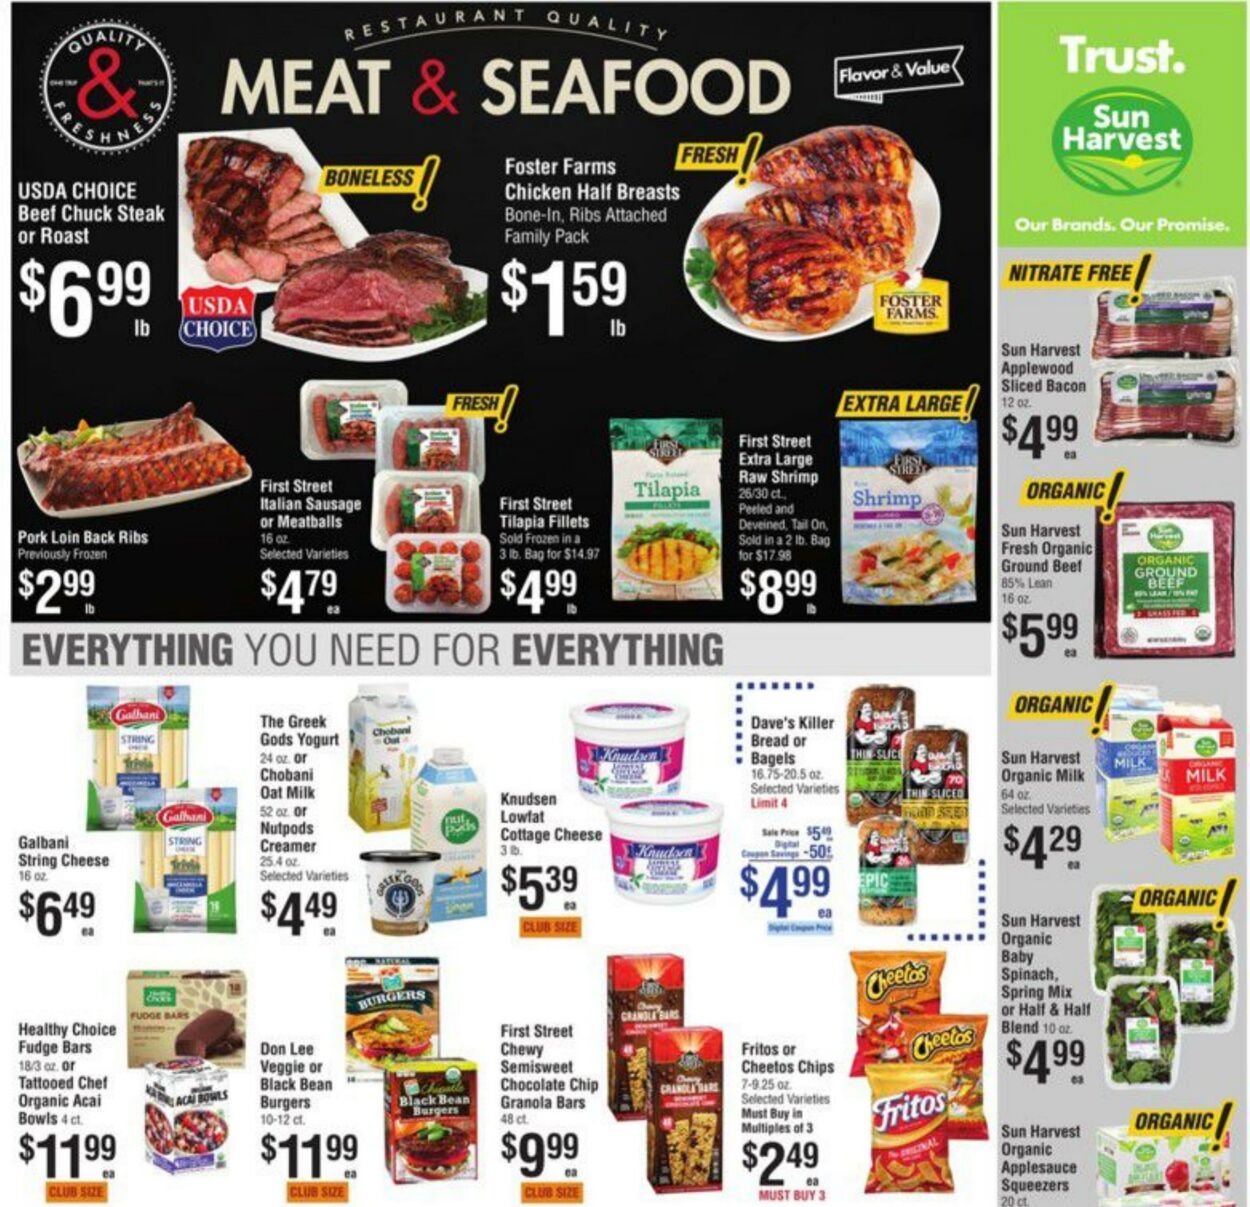 Weekly ad Smart and Final 01/04/2023 - 01/10/2023